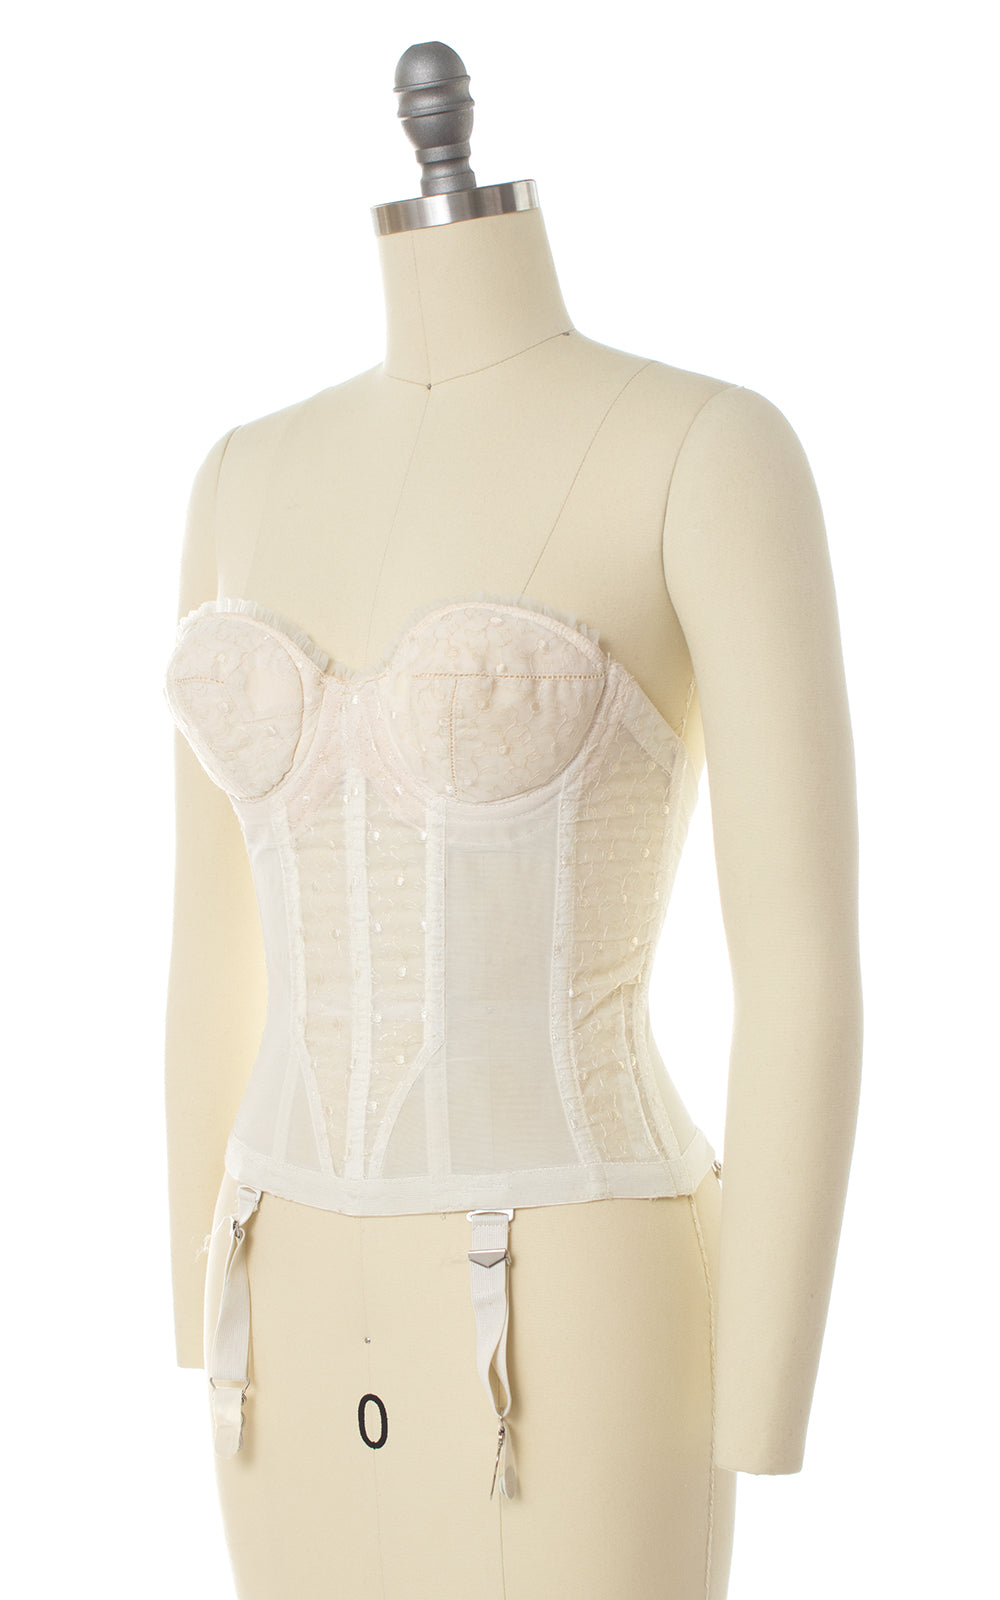 1950s Padded Lace Bustier Bra with Garters